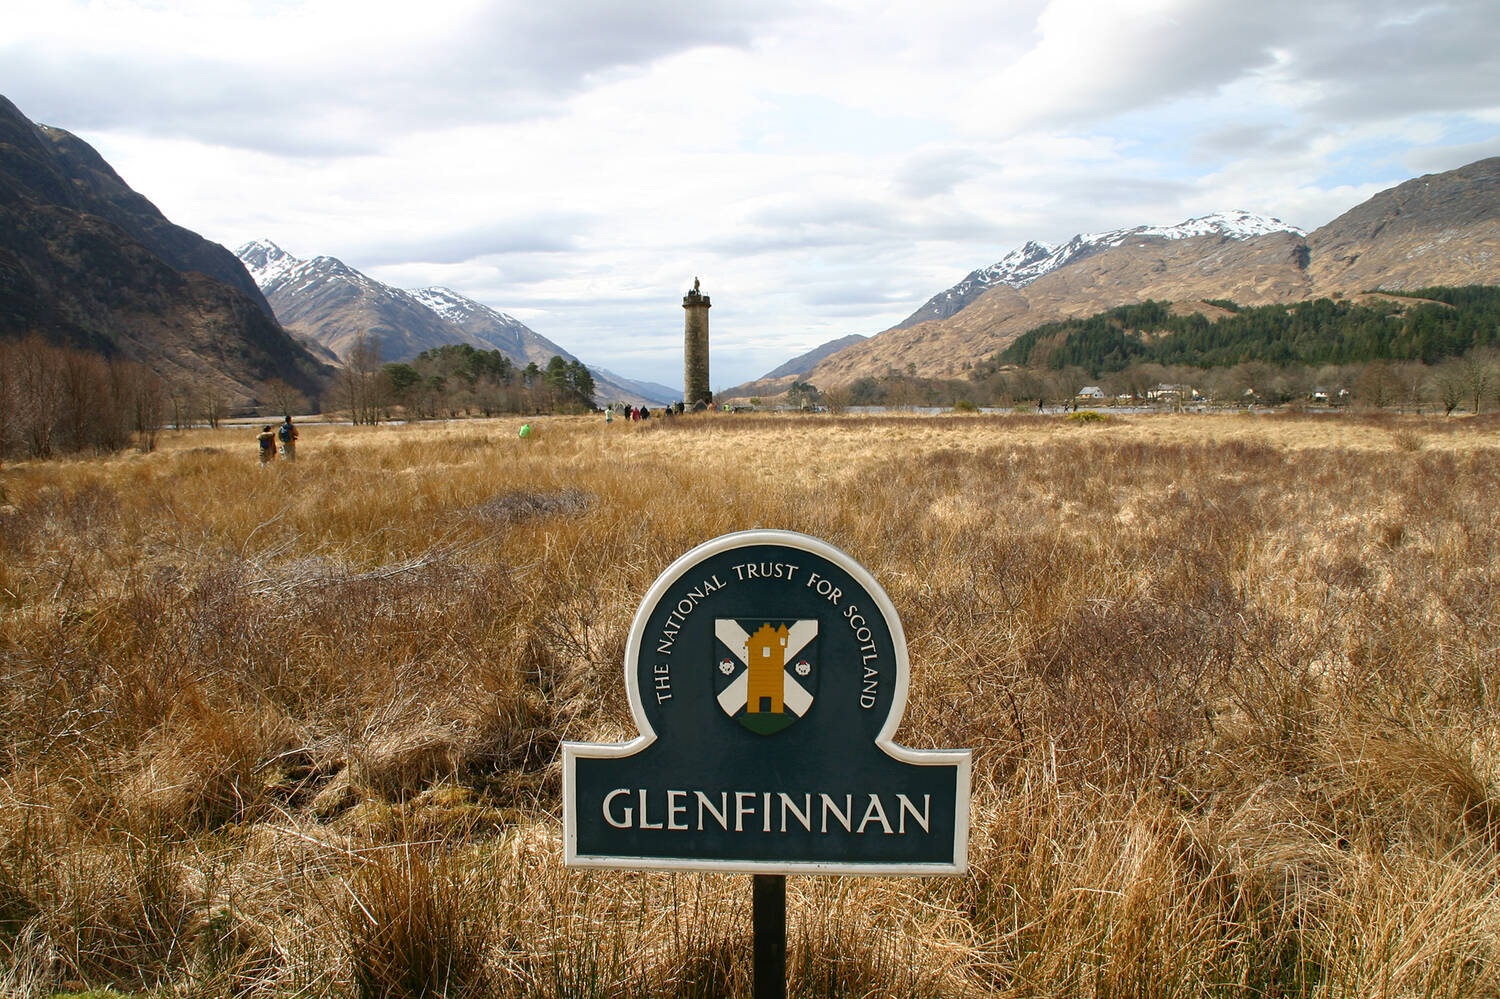 Glenfinnan with the monument in the background